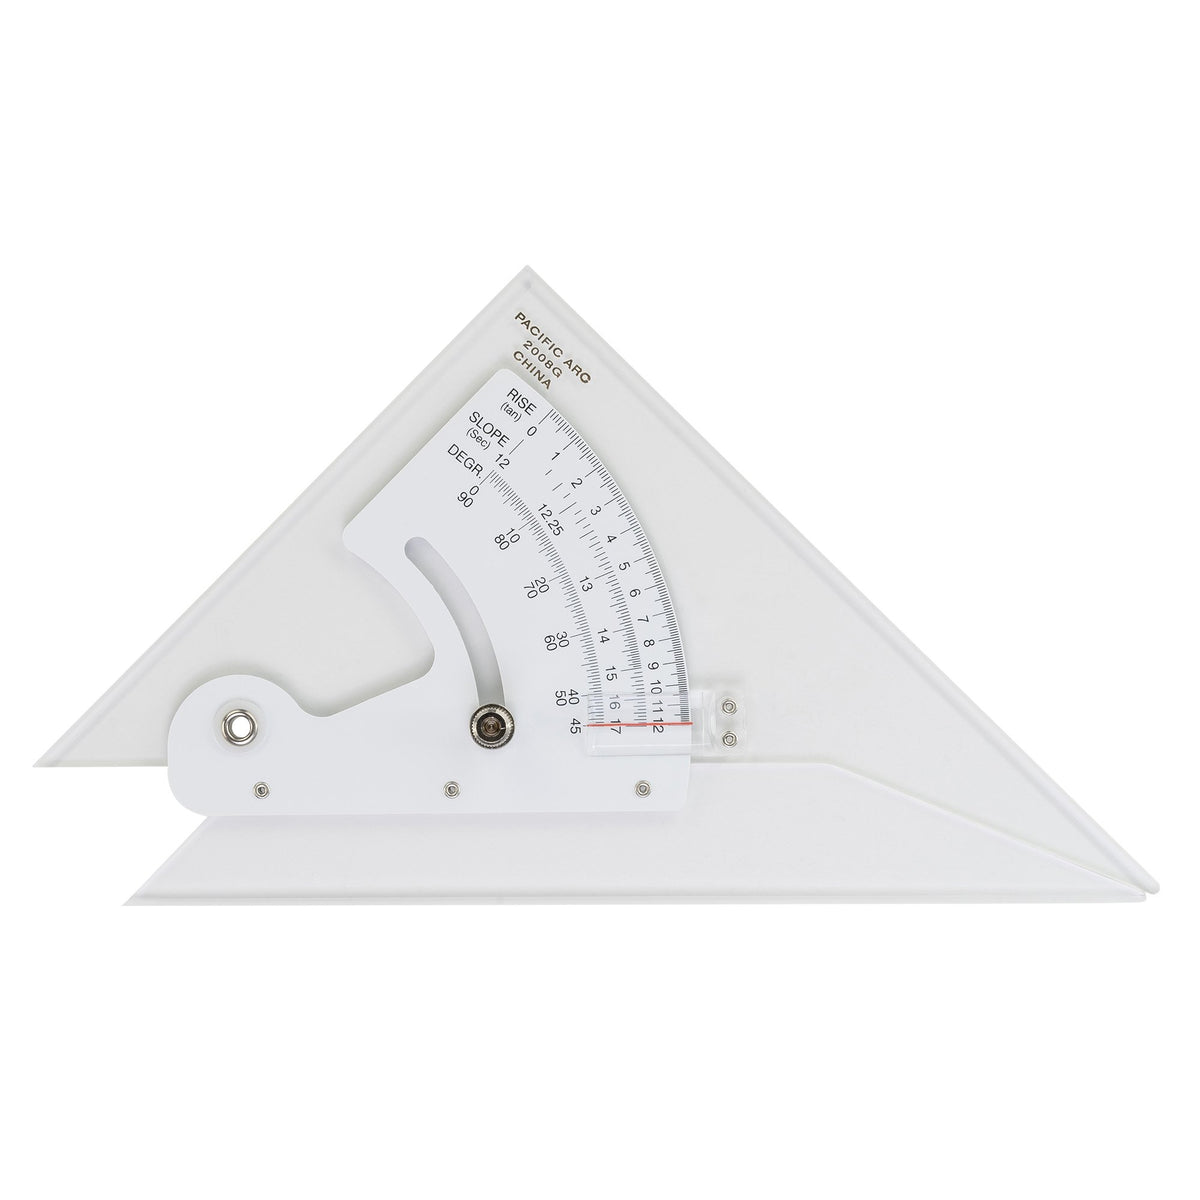 Pacific Arc Stainless Steel Rulers inch Metric with Conversion Table 6 in.